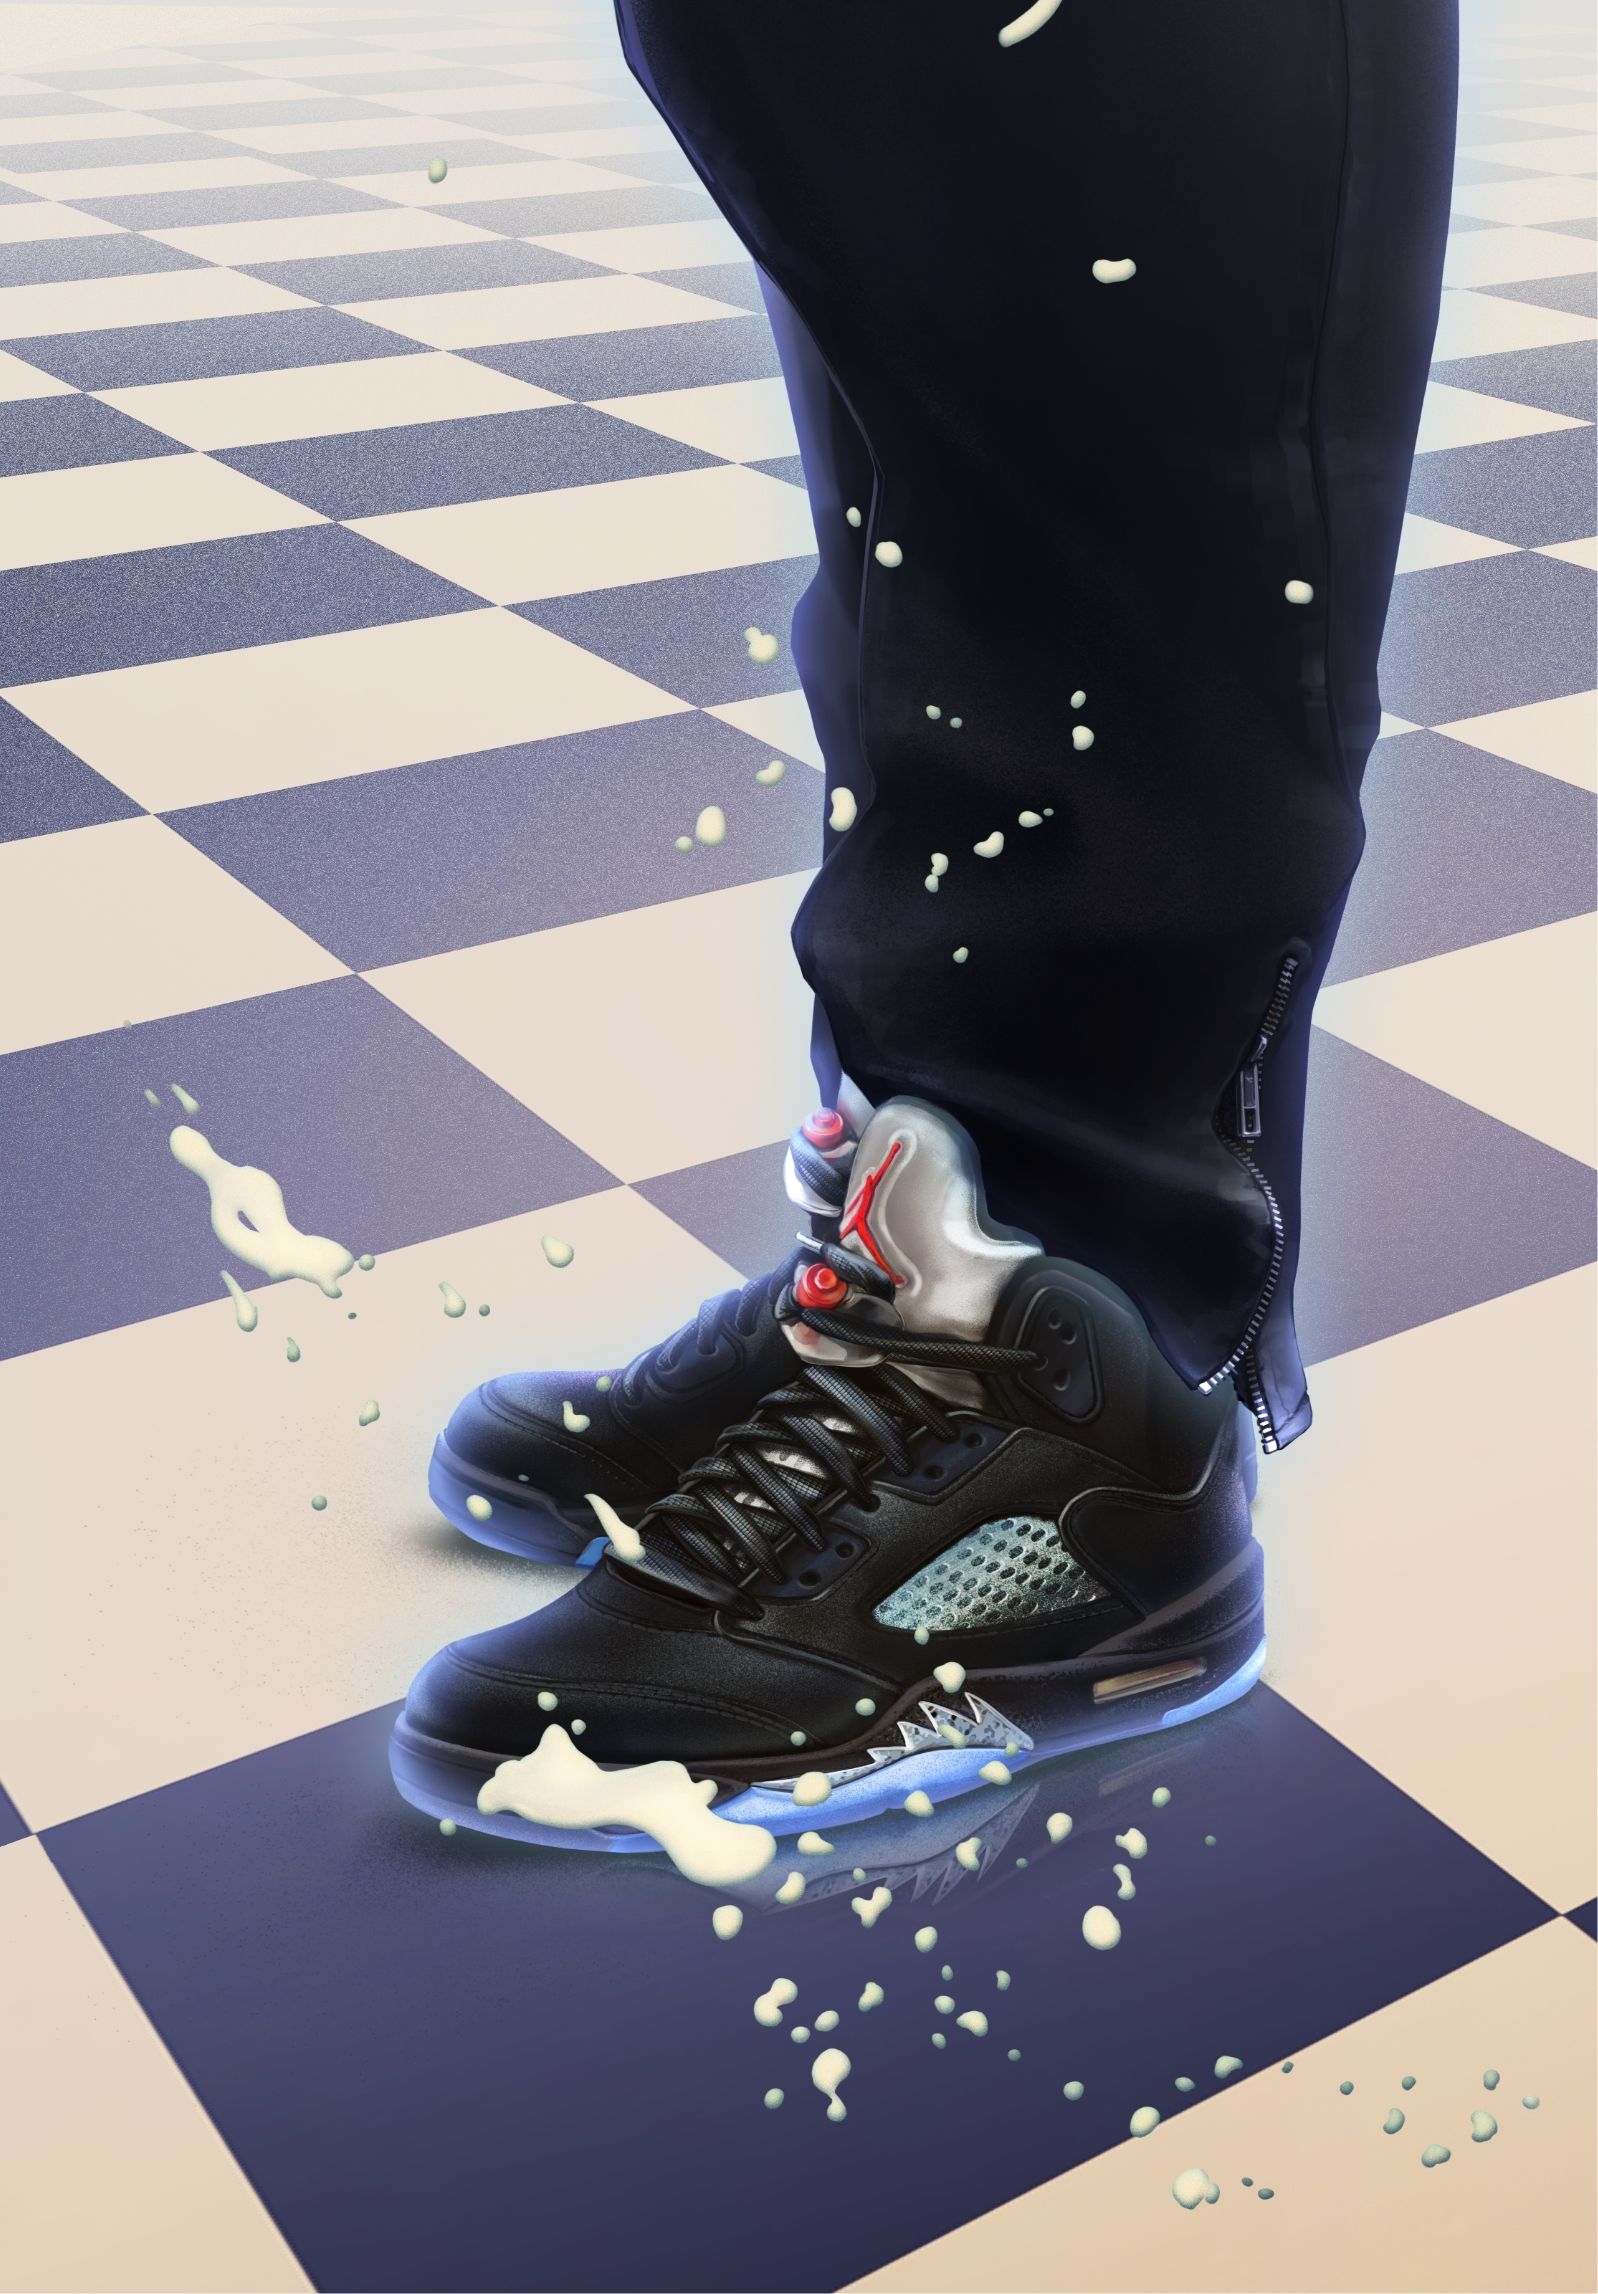 rendering of someone wearing Jordan V black sneakers on a black and white checkered floor. Milk is being spilled onto the shoes